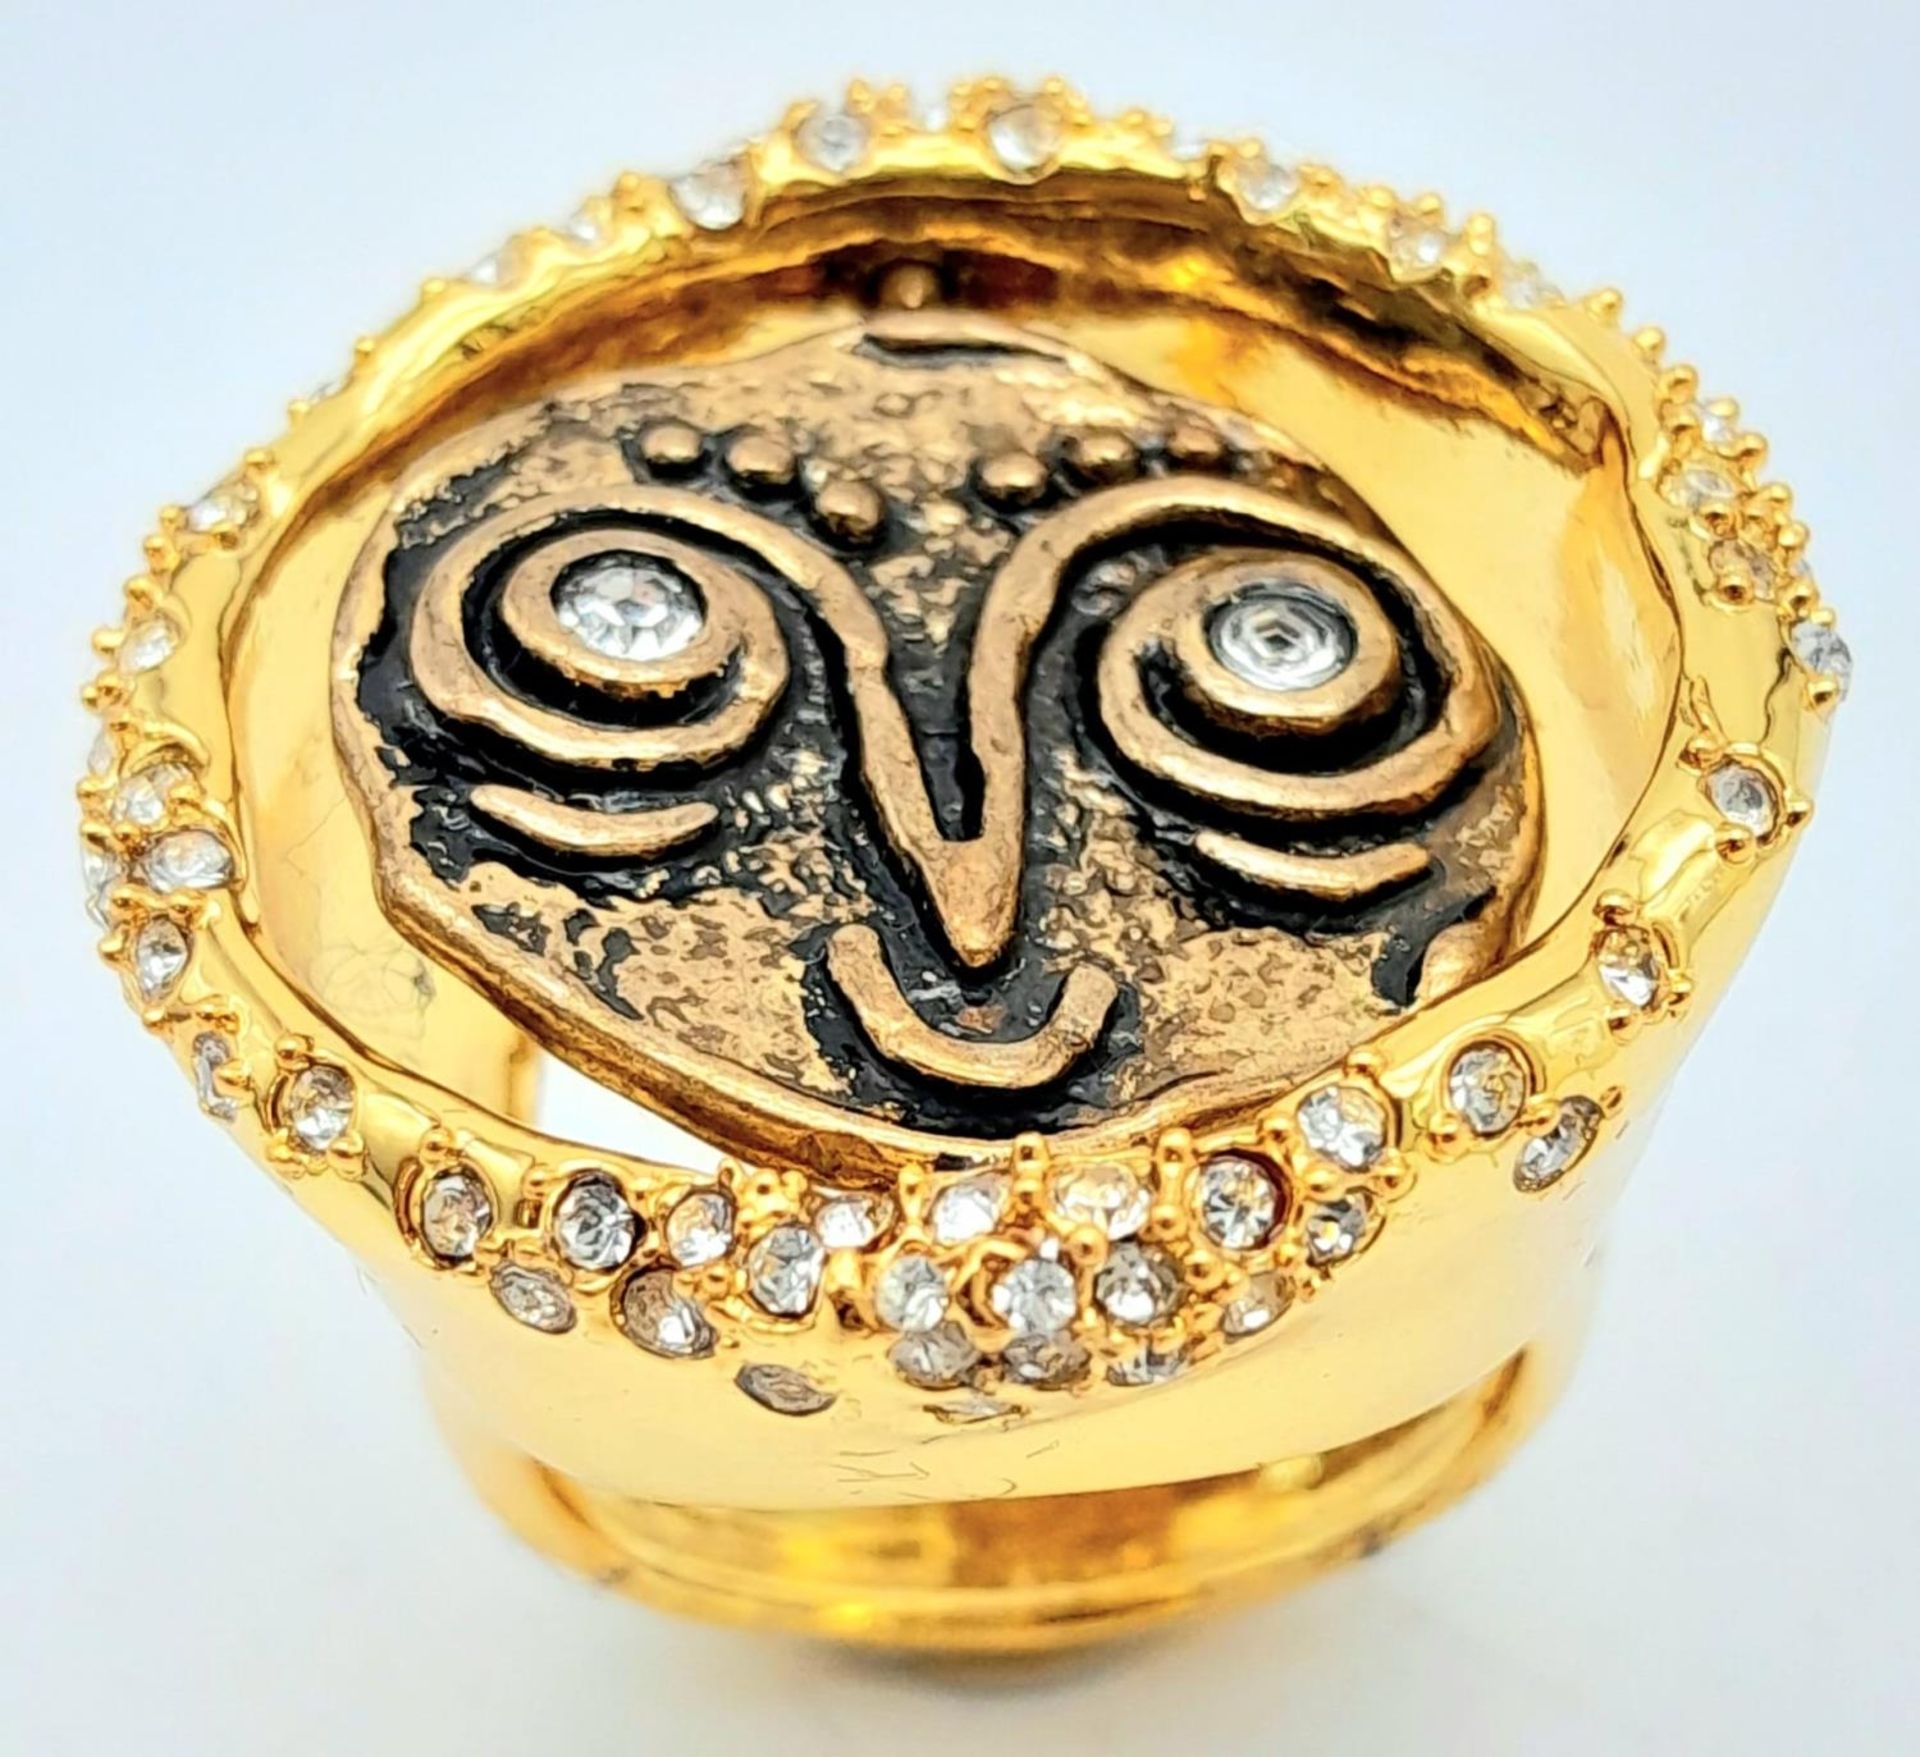 A fabulous and unusual ALEXIS BITTAR creation, a stone set, “Revolving ancient coin ring” with the